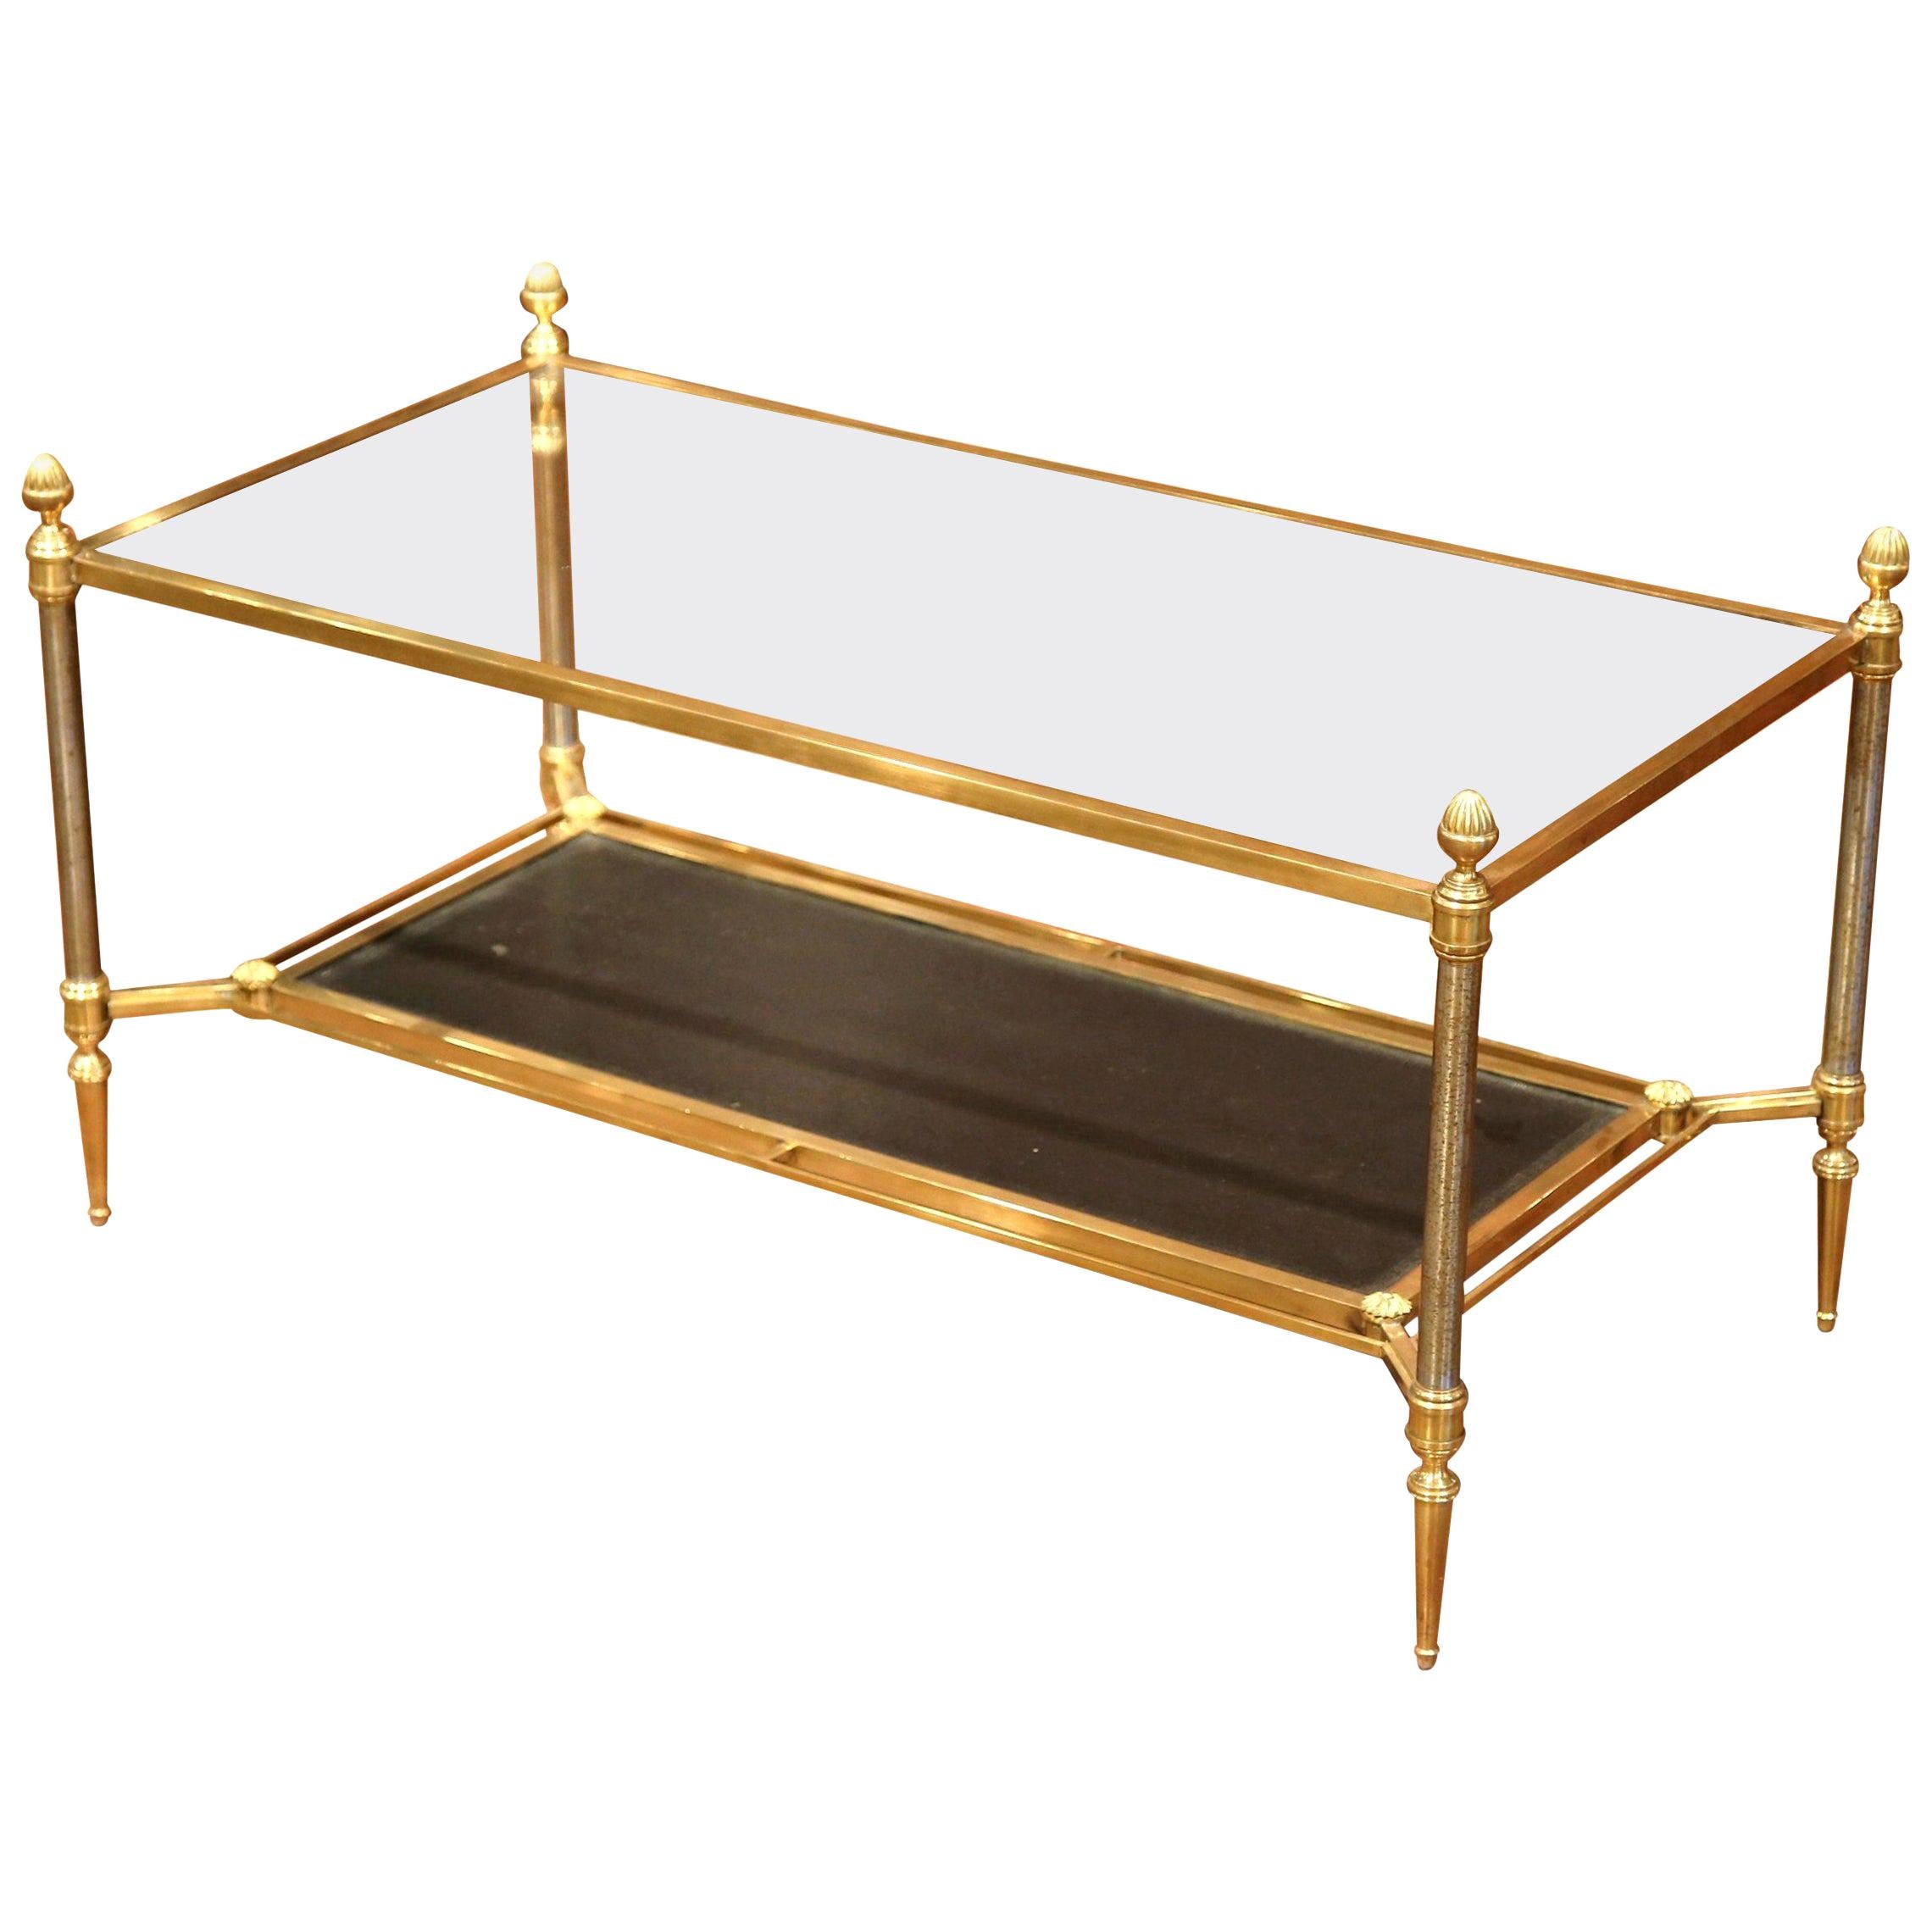 Mid-20th Century French Brass Steel and Leather Coffee Table from Maison Jansen